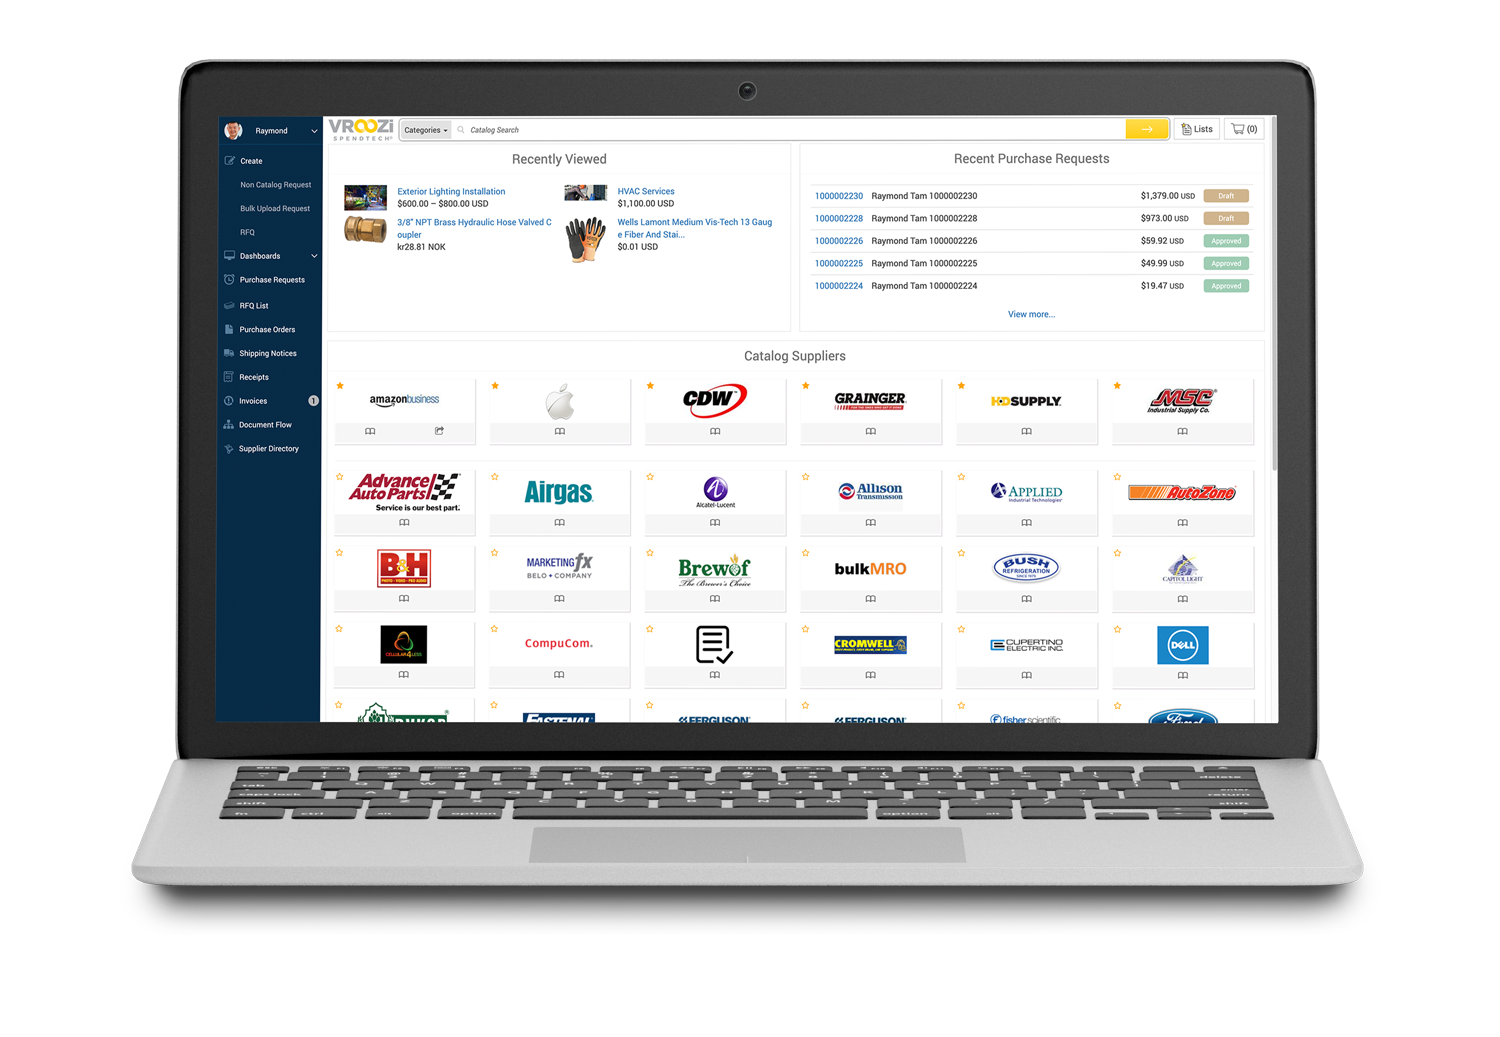 Access to thousands of suppliers with customized catalogs, accessible from ONE easy-to-use platform, makes employee purchasing easier than ever.